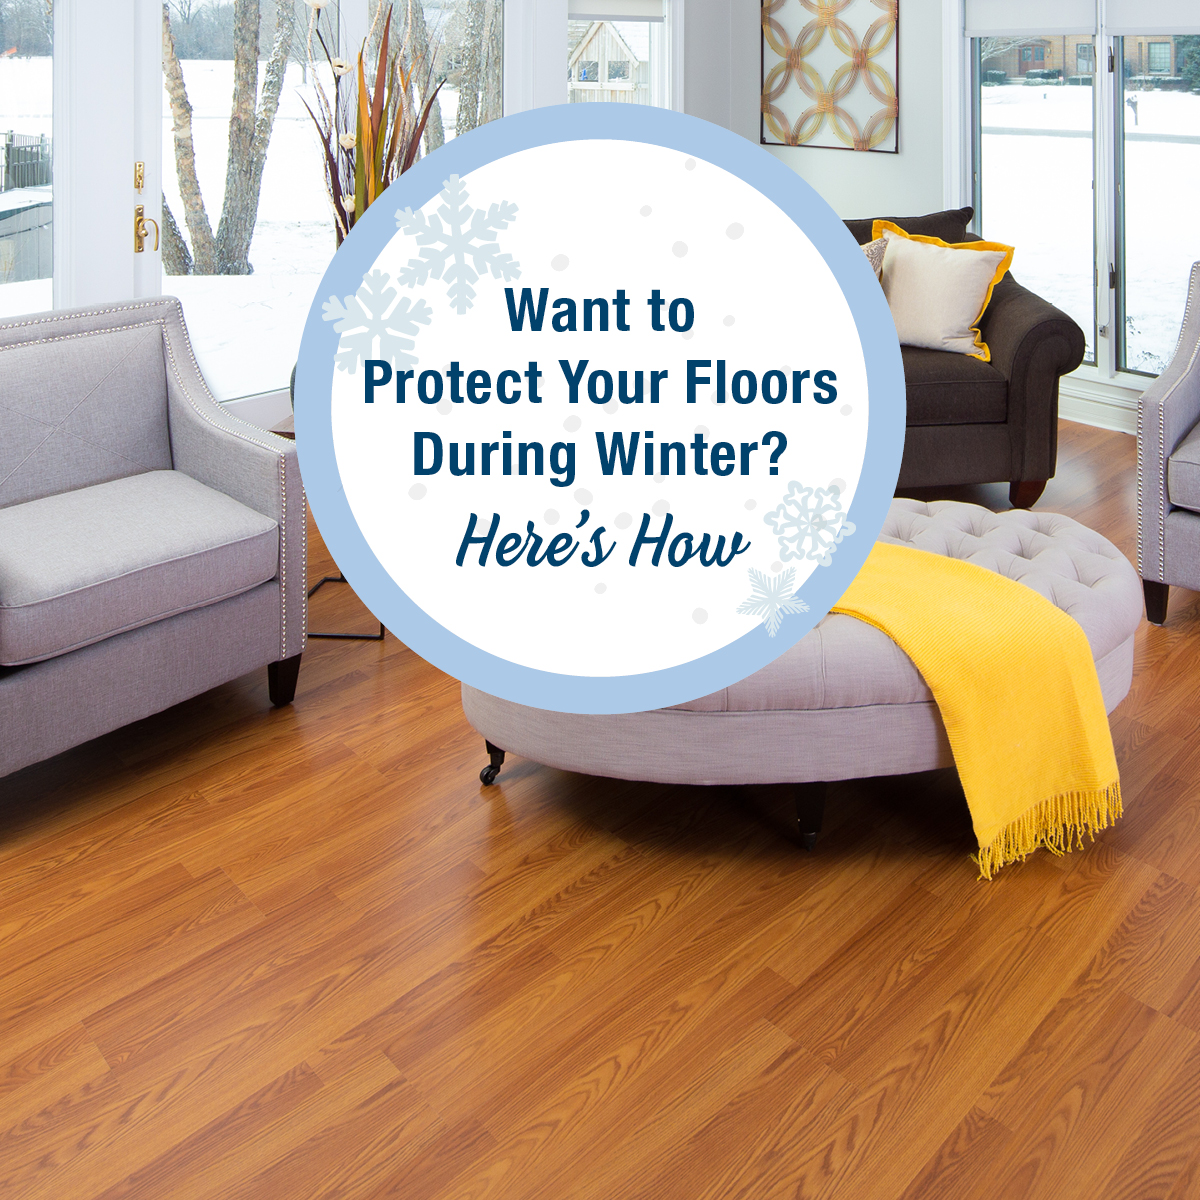 Want to Protect Your Floors During Winter? Here's How